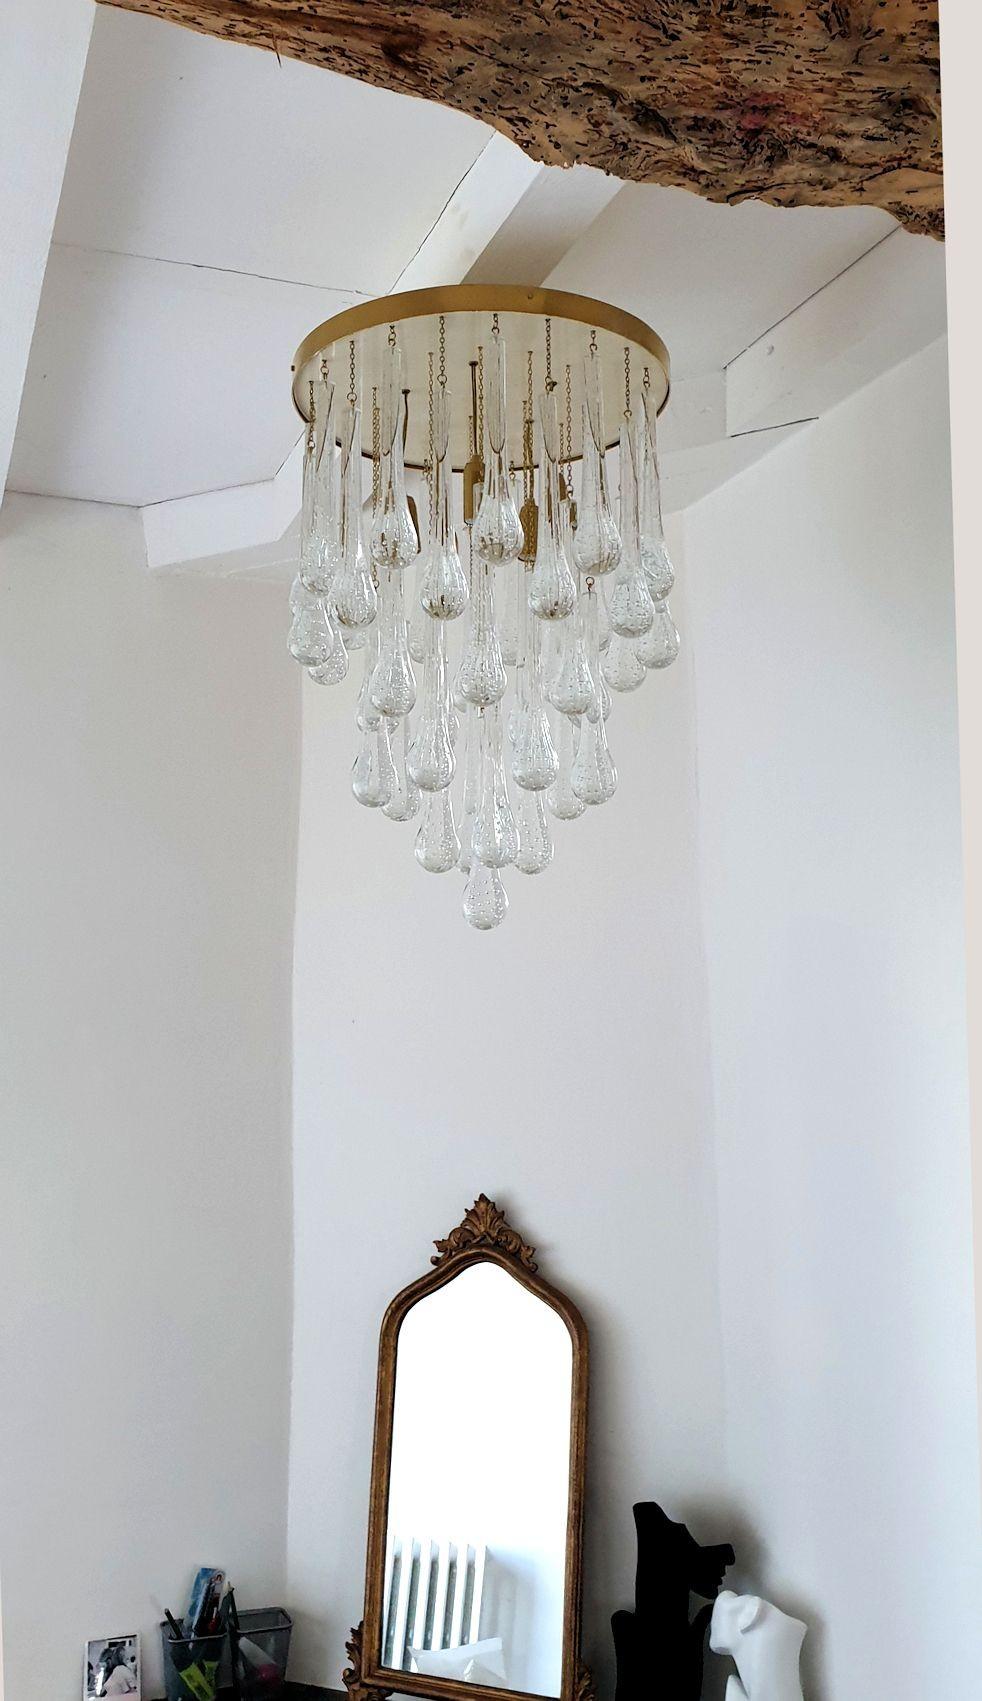 Mid-Century Modern Murano glass tear drop flush mount chandelier, Italy 1980s.
Two Murano chandeliers available: priced and sold individually.
To inquire about the pair, select 2 items in the menu.
The vintage flush mount is made of a brass & ivory